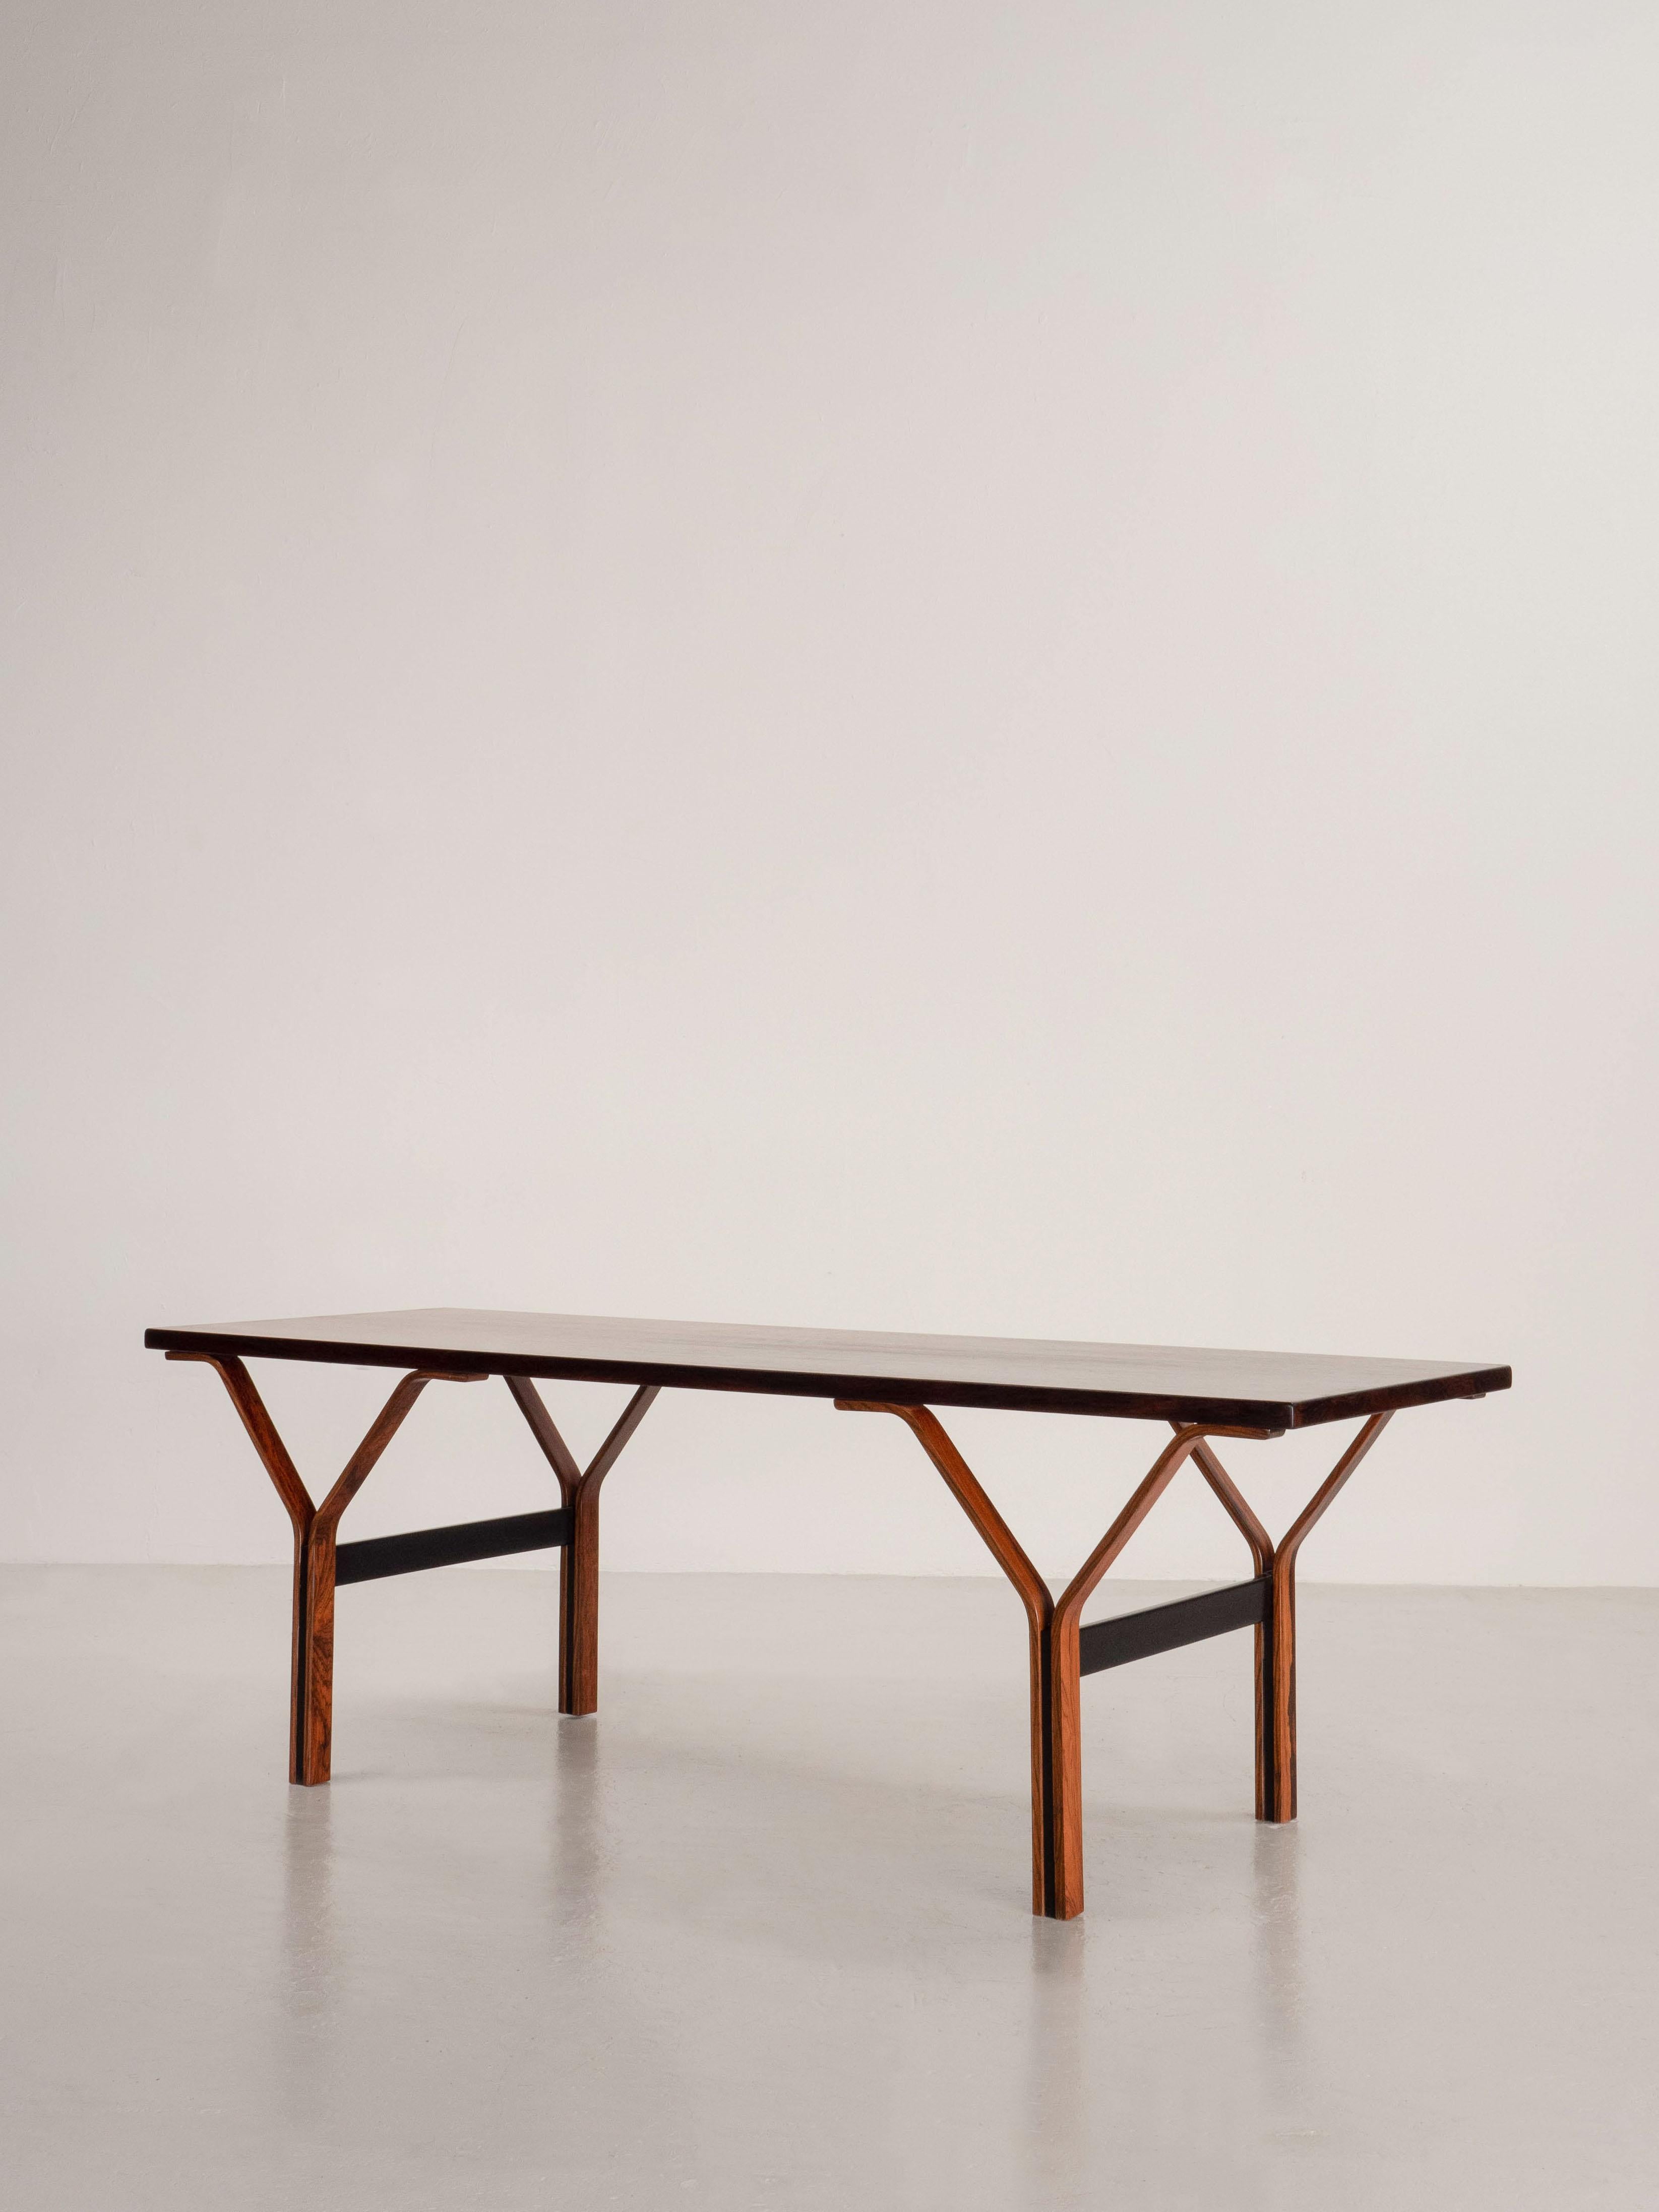 Rectangular coffee table made from Brazilian rosewood. The piece was made in Denmark most likely in the 1960's/1970's. Sculpted legs and a striking grain.

The table has been refinished and is in excellent condition with light wear. Hand signed